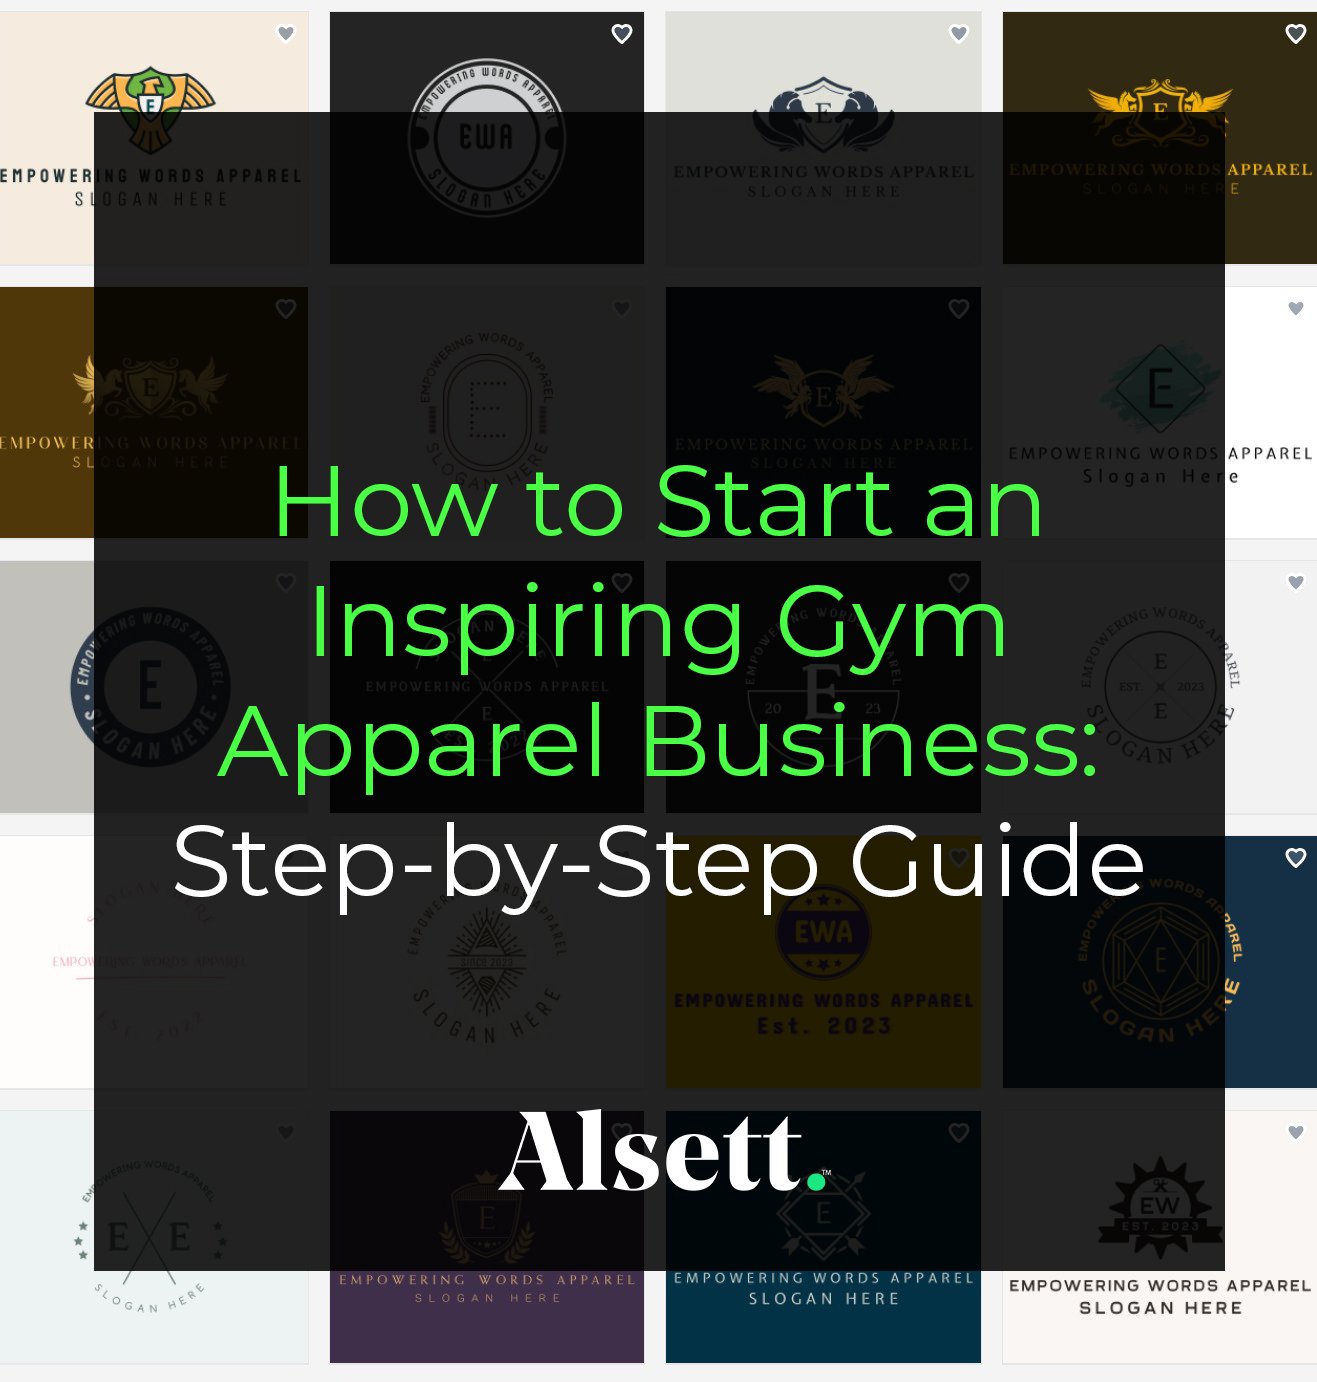 Empowering-Words-Apparel - How to Start an Inspiring Gym Apparel Business - Step-by-Step Guide